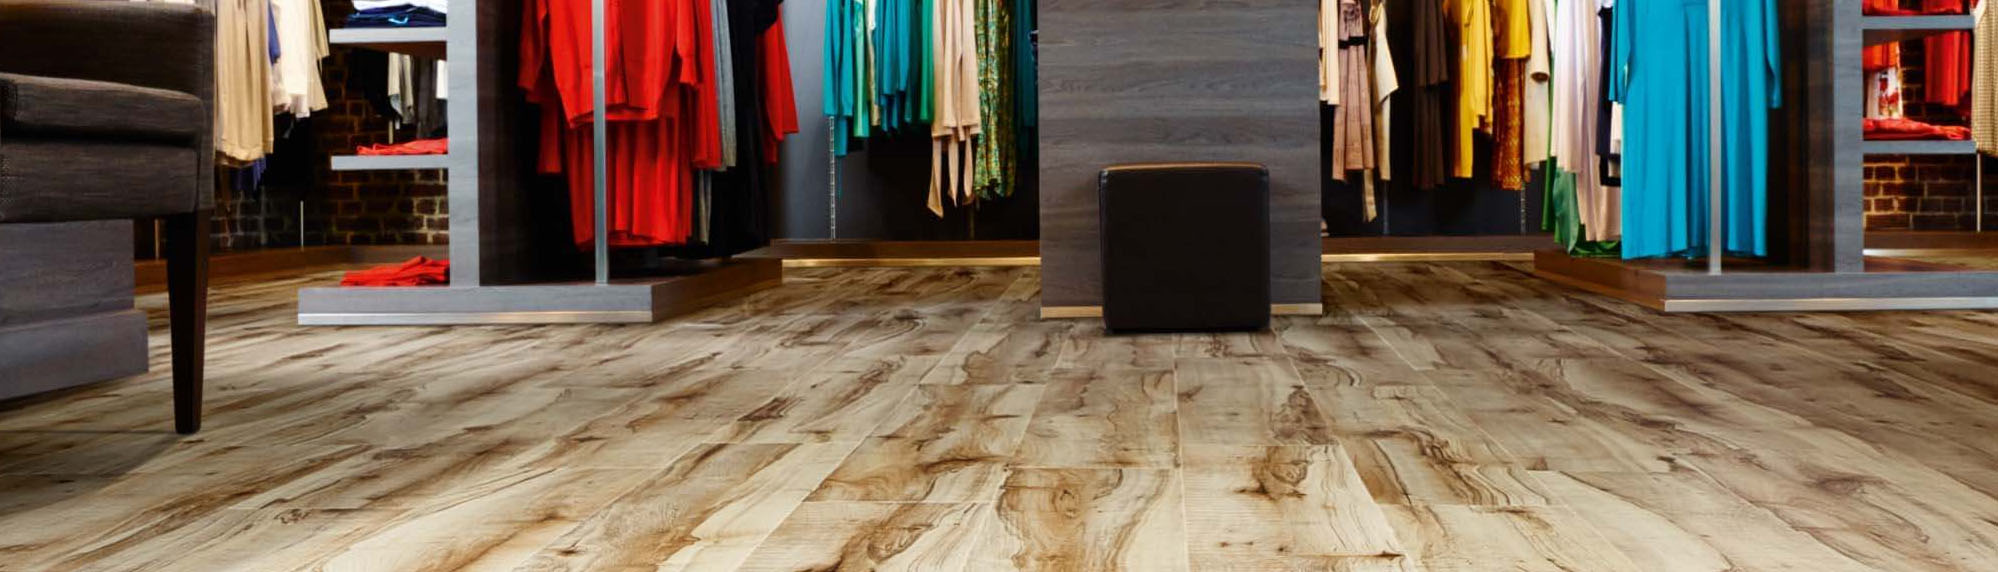 Bespoke Shop Flooring Page Featured Image